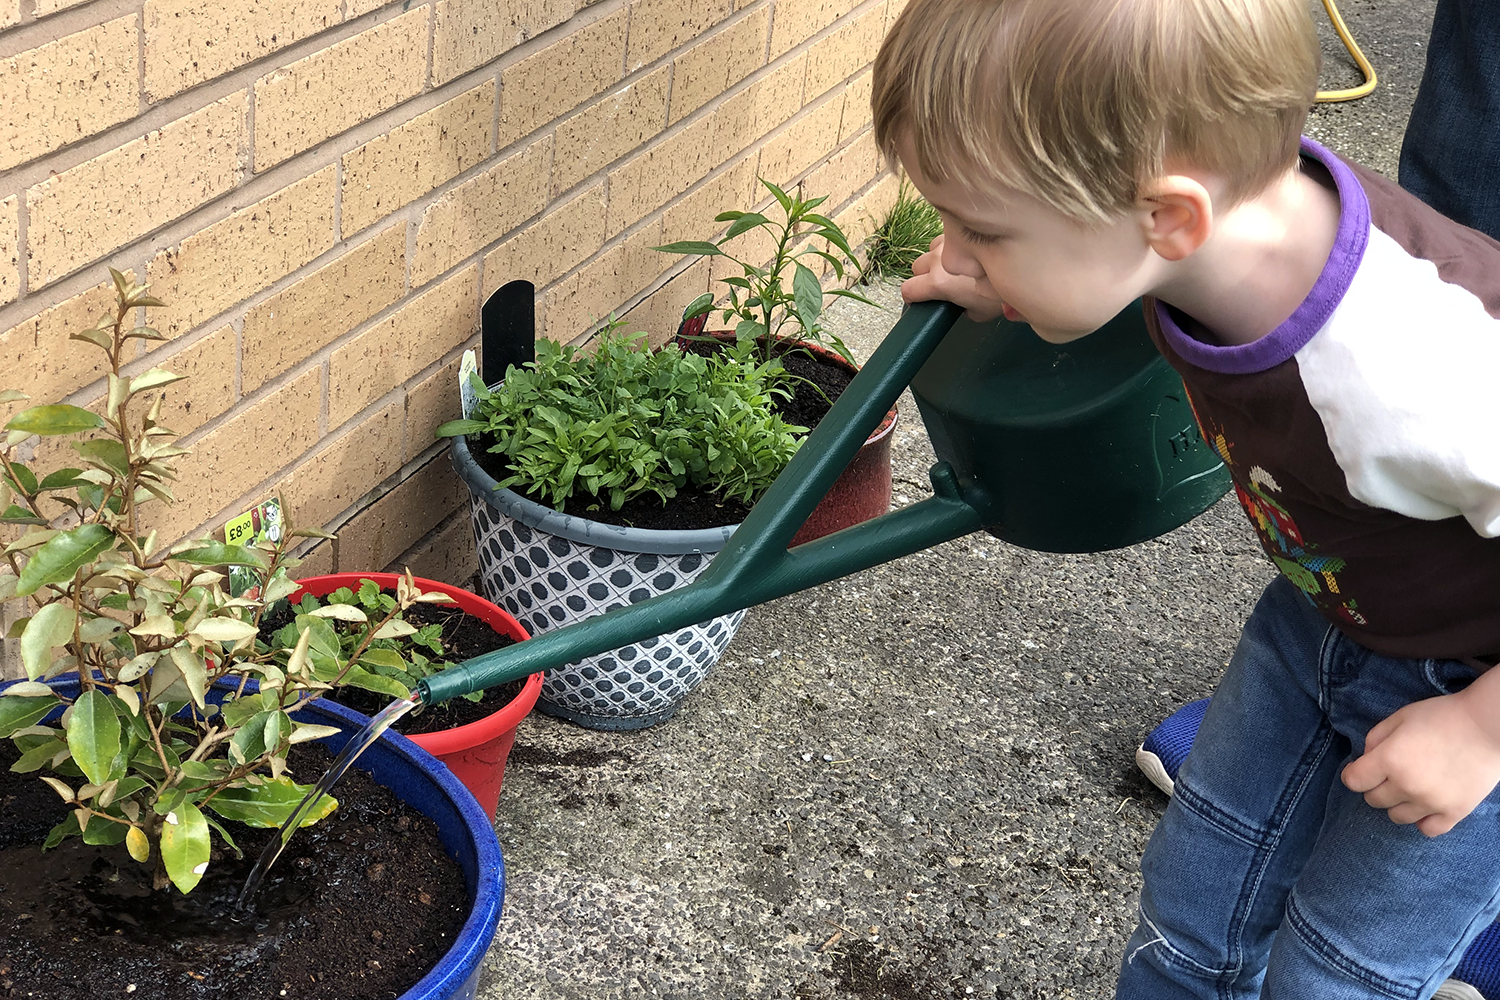 Gabe watering the plants that he planted with Daddy